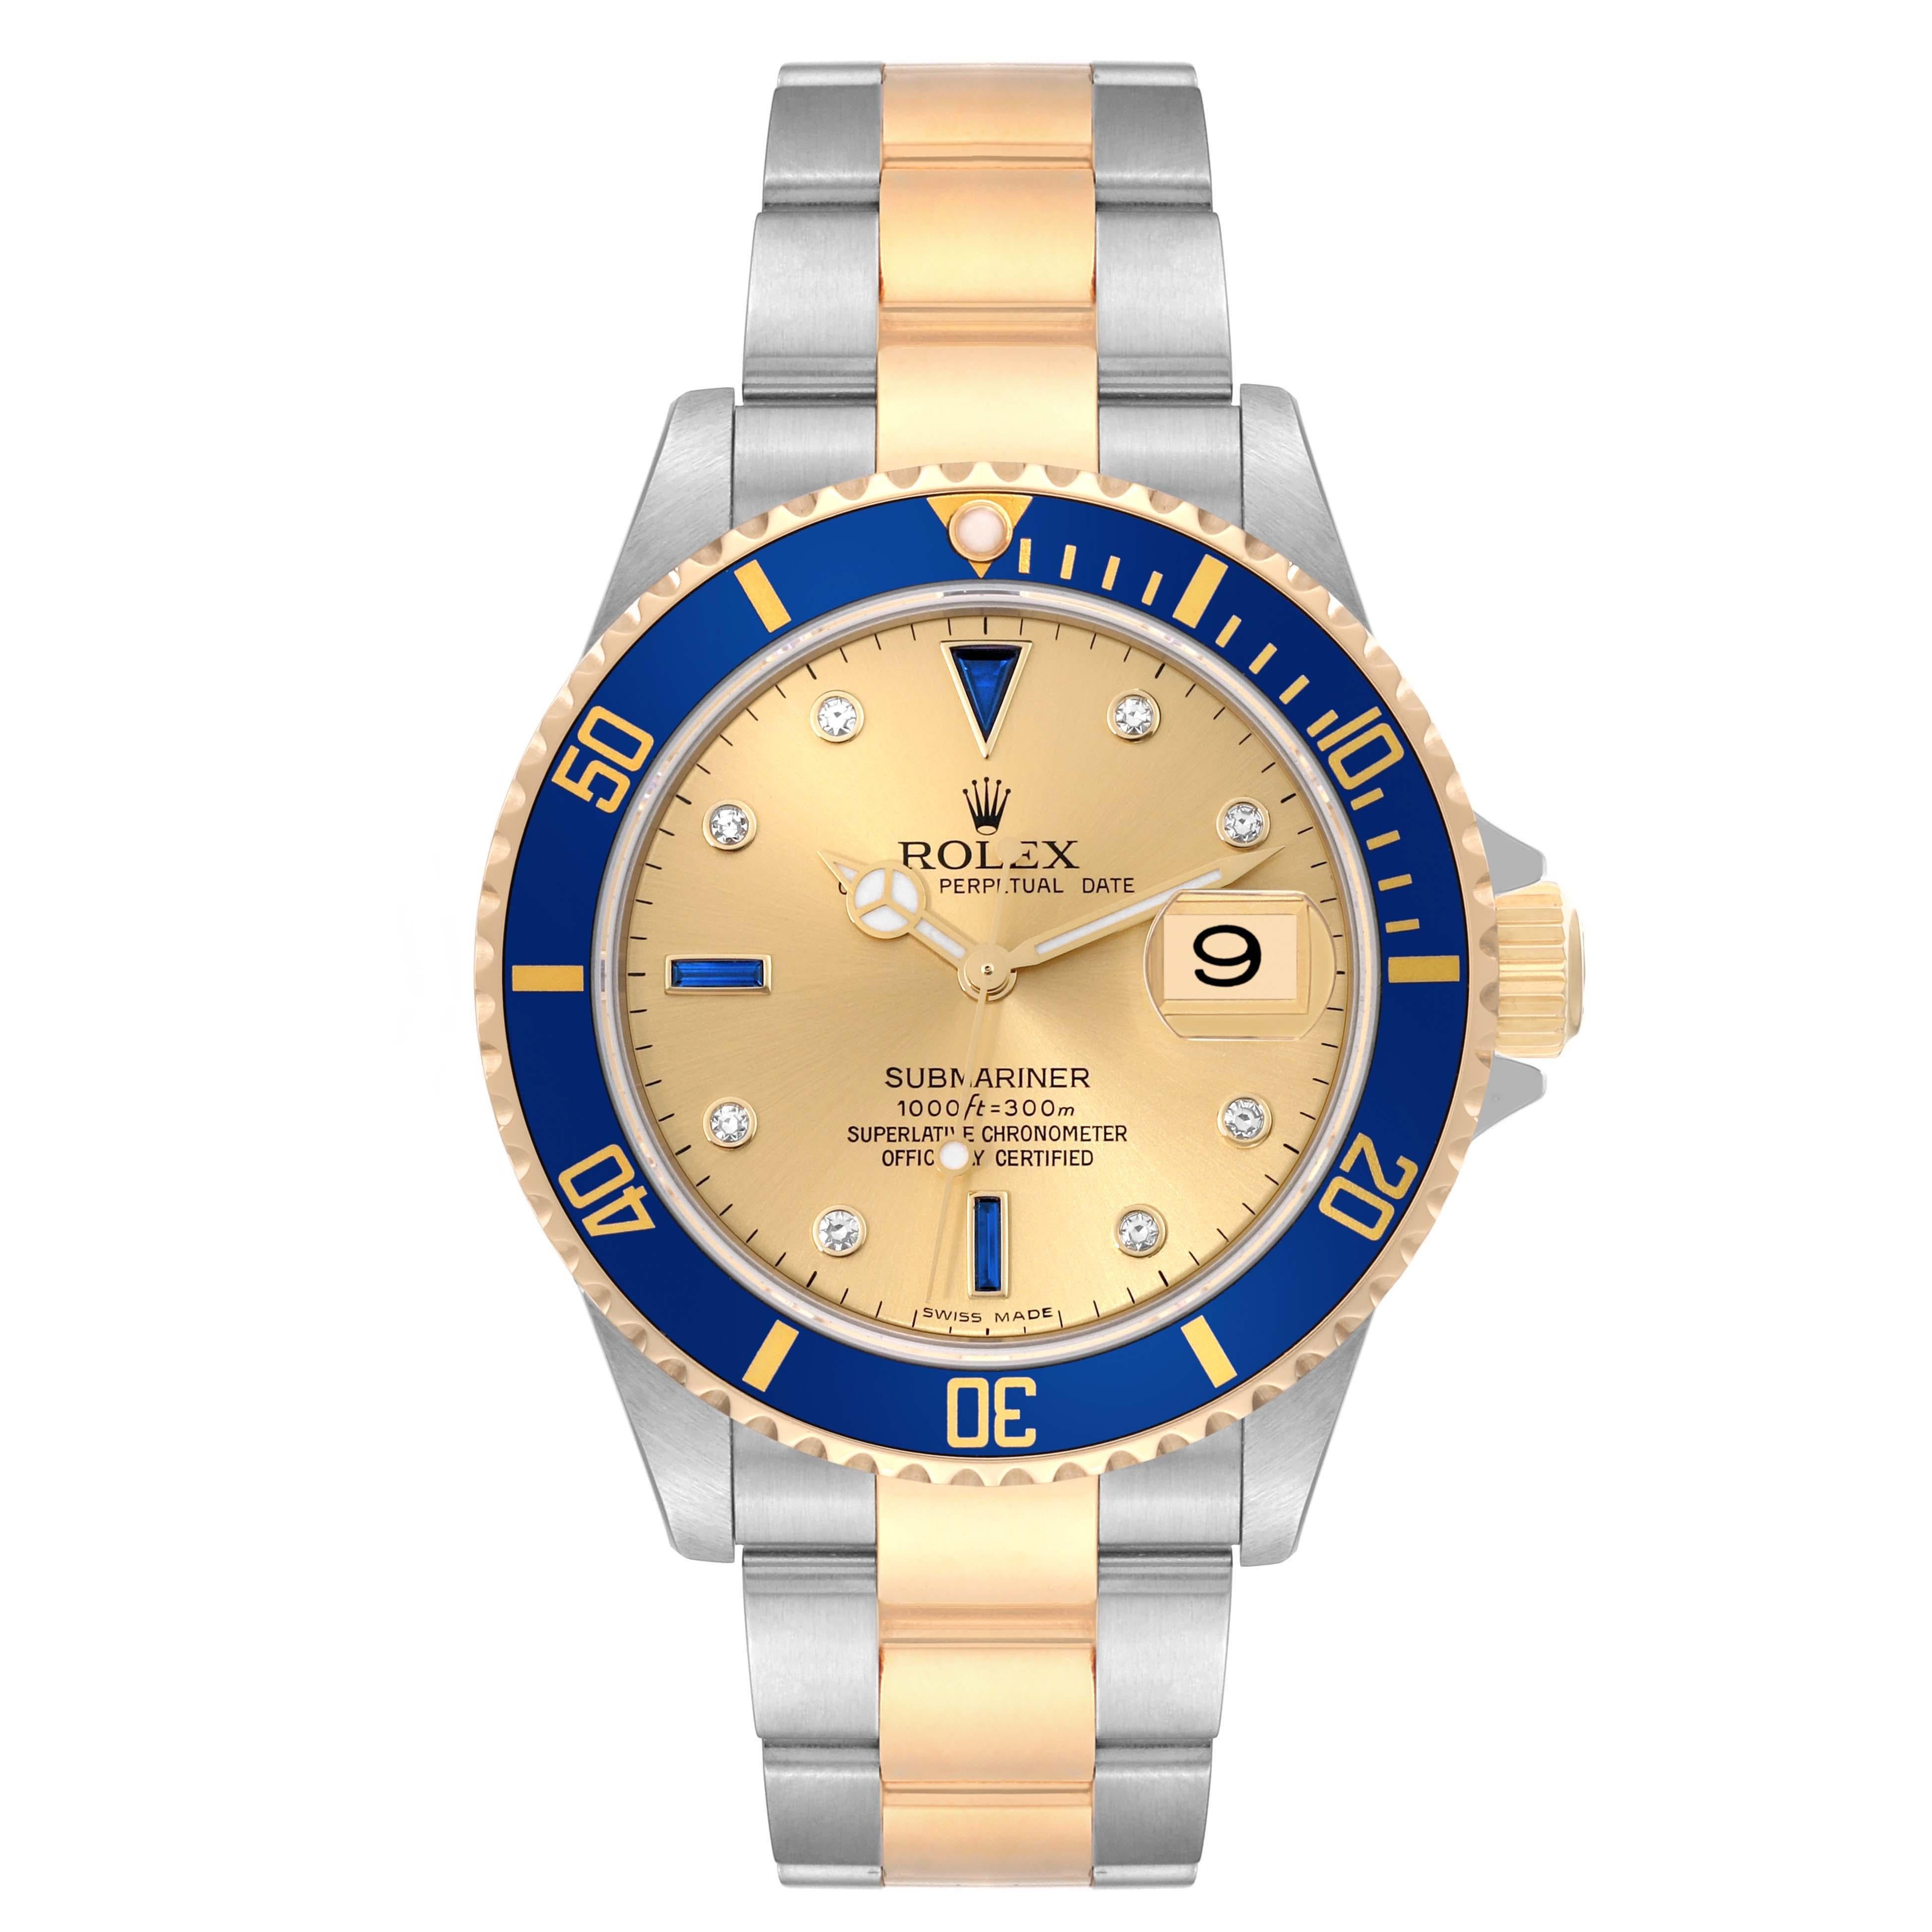 Rolex Submariner Steel Yellow Gold Diamond Serti Dial Mens Watch 16613 Box Card For Sale 7